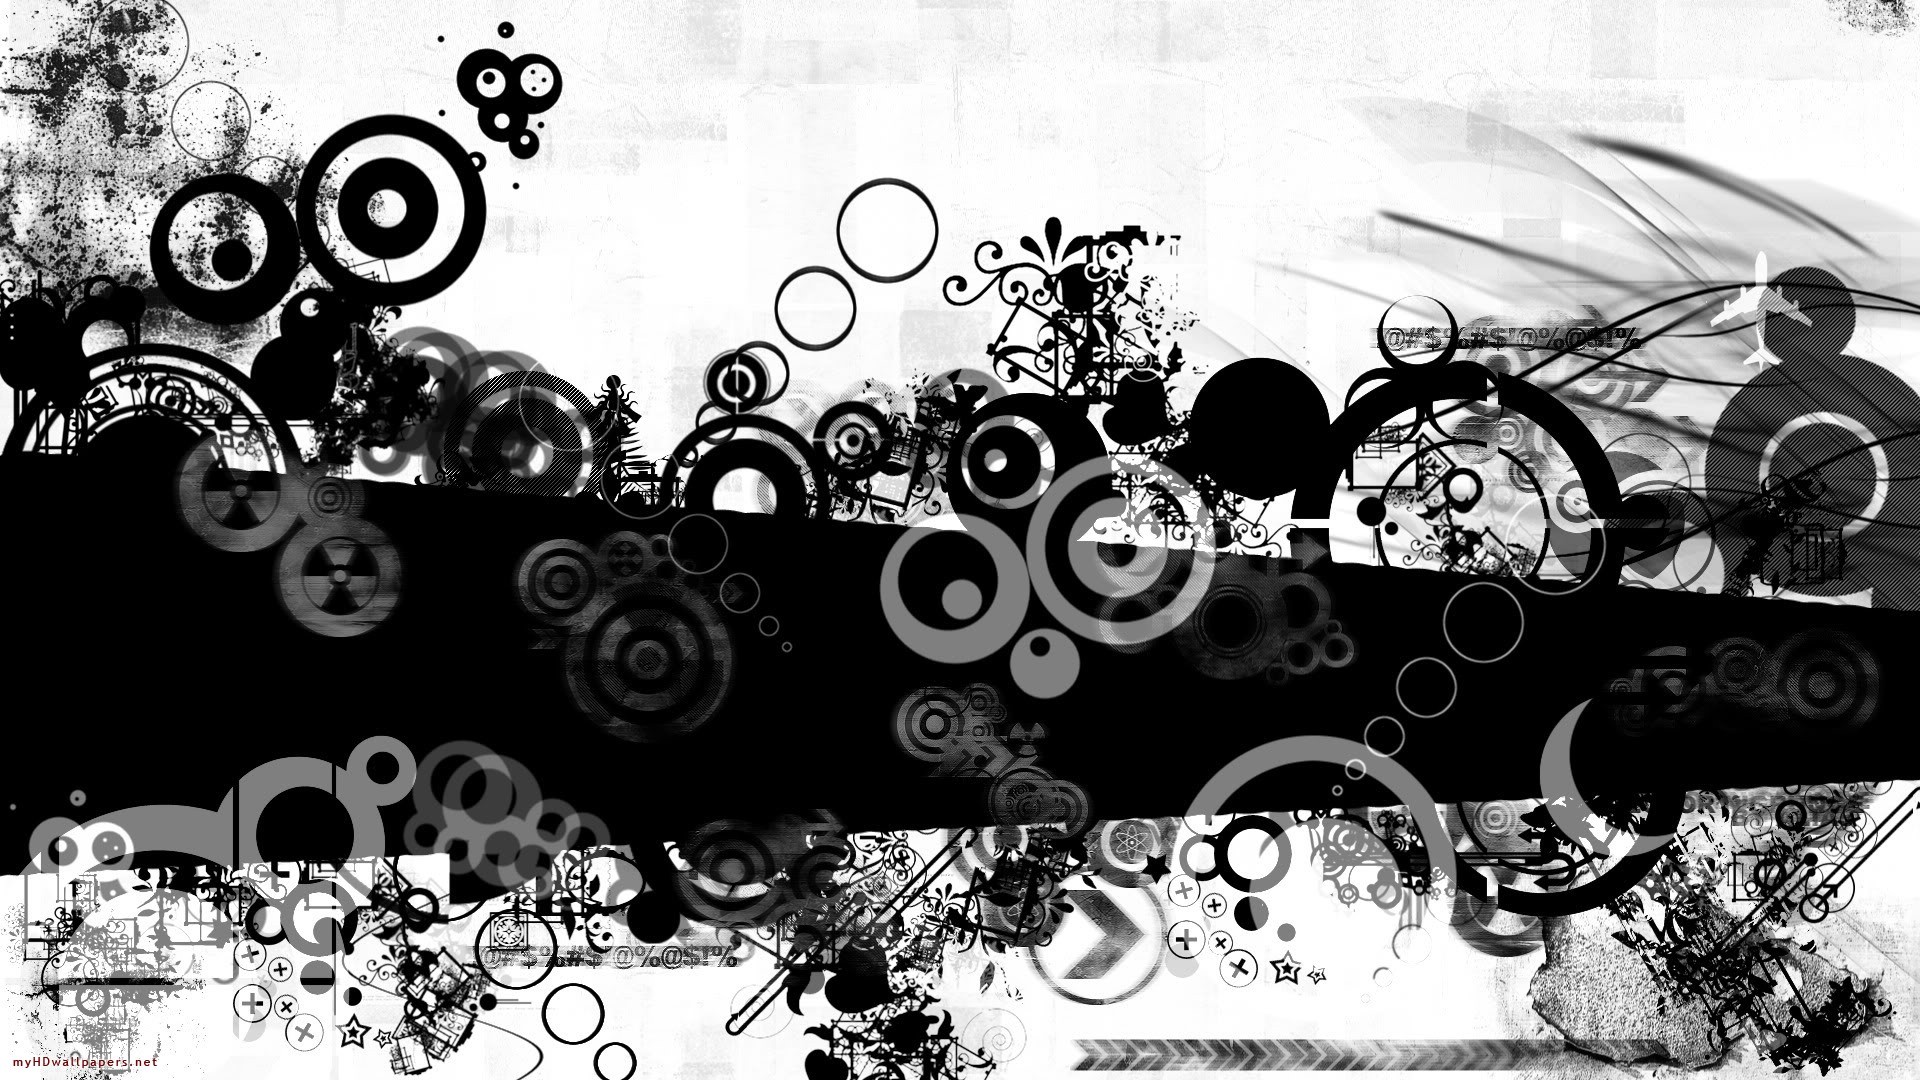 1920x1080 Abstract In Red And White Black Design Free Hd 584486 Wallpaper wallpaper